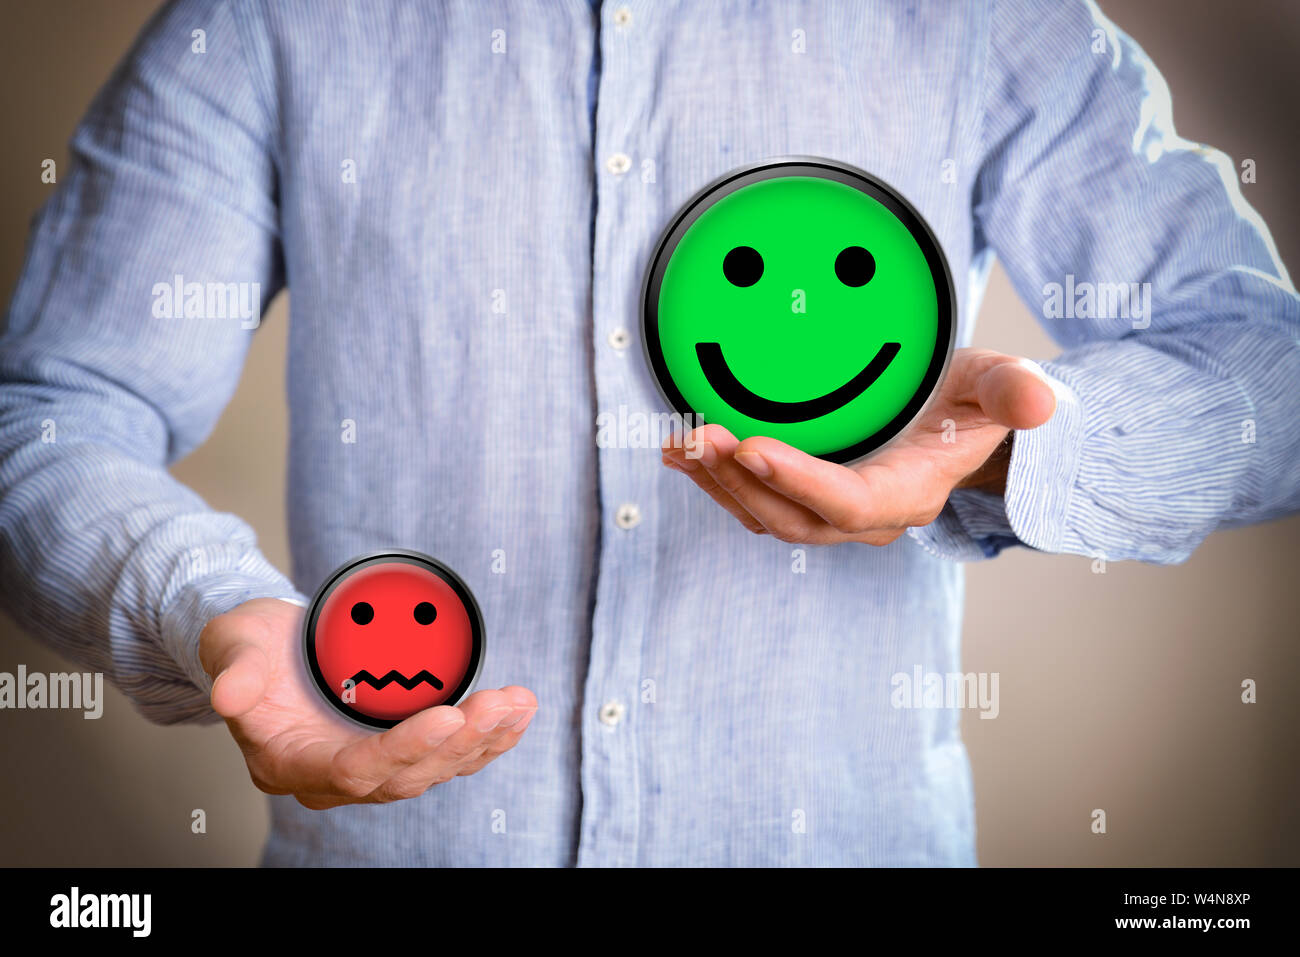 Concept of person valuing positively with colorful emoticon illustrations. Horizontal composition. Front view. Stock Photo